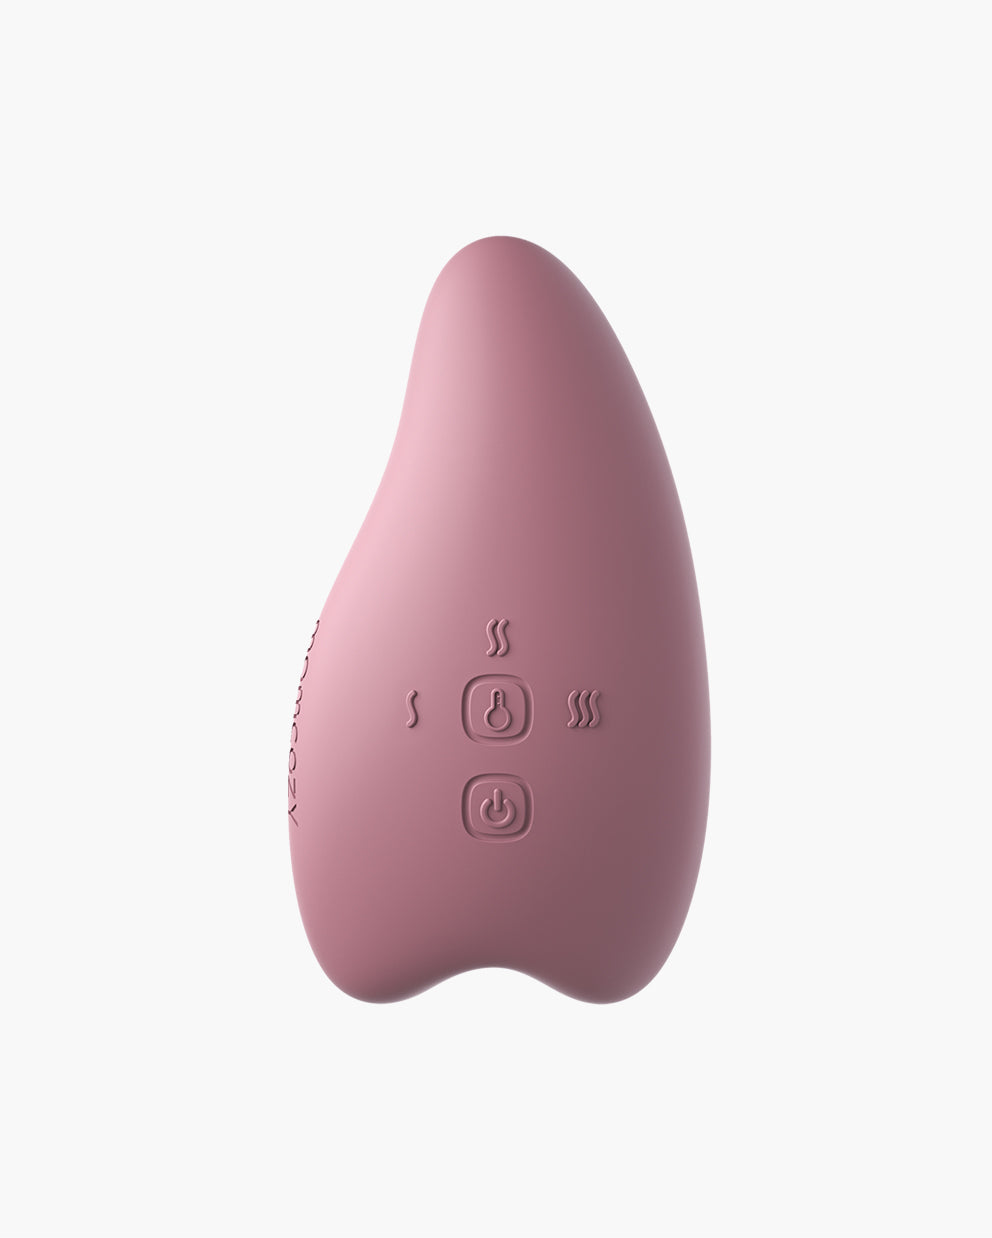 Double 2-in-1 Warming & Vibration Lactation Massager for Breasts